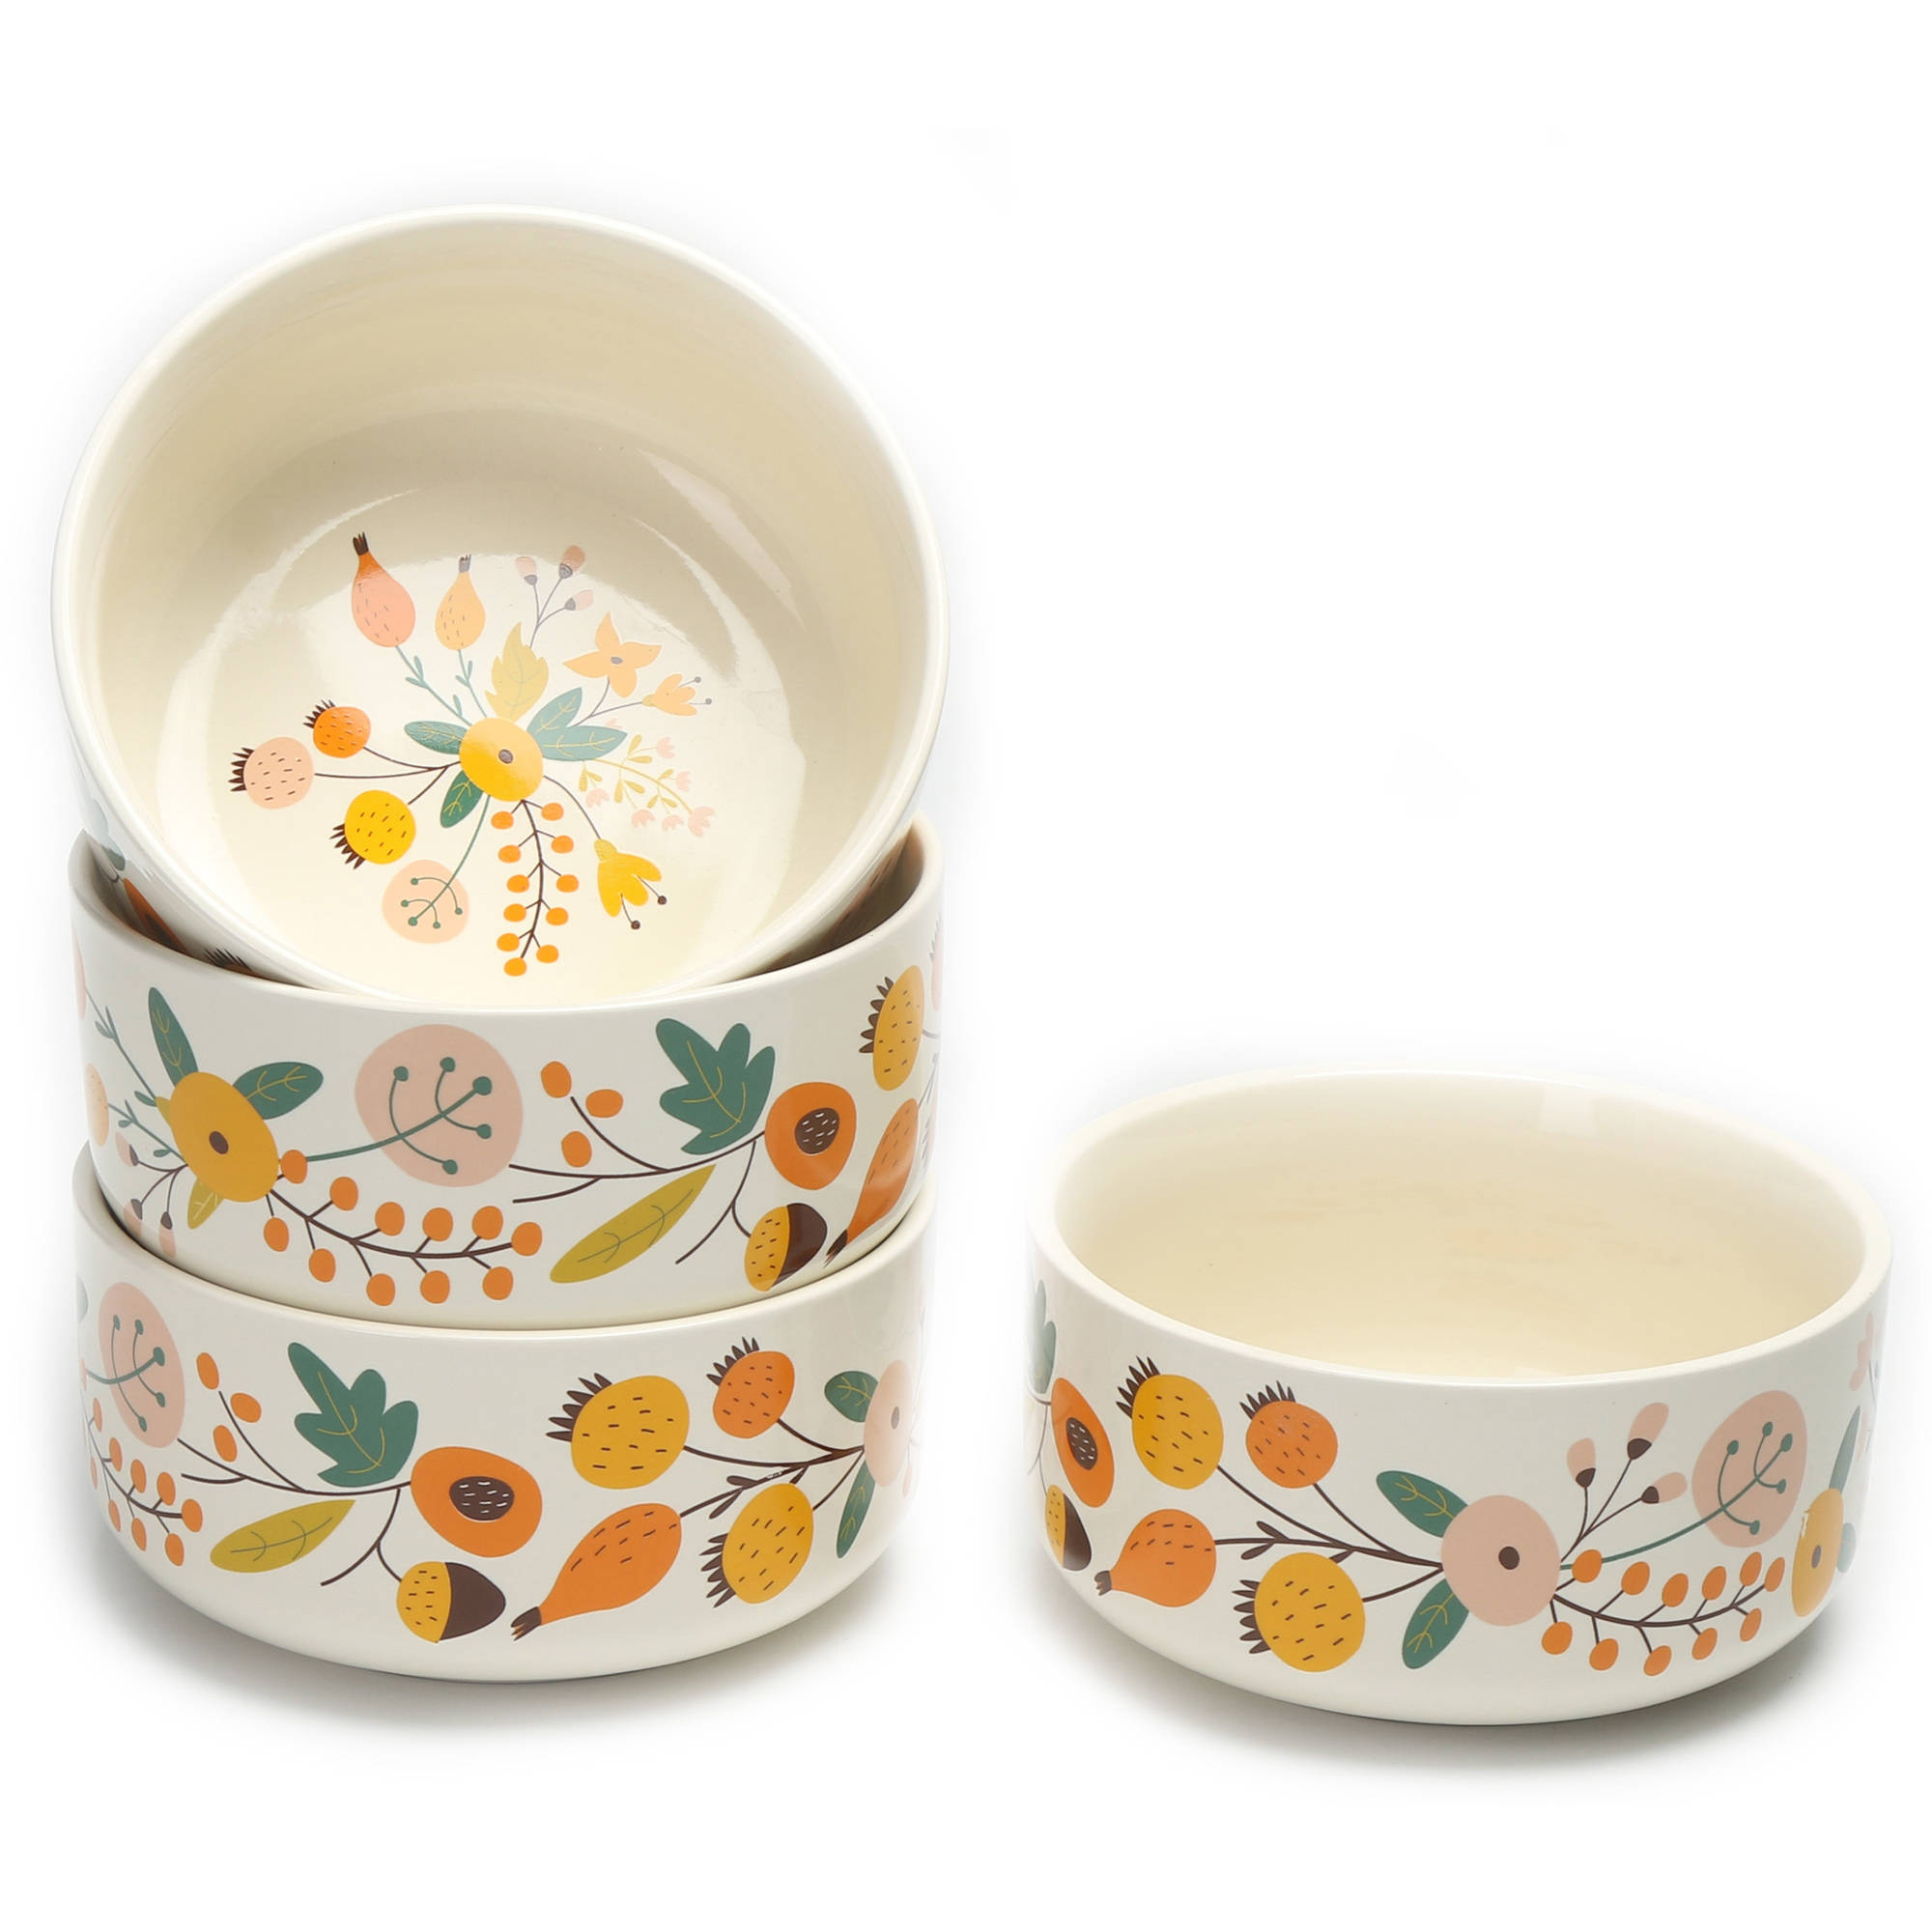 Mainstays 16-Piece Happy Harvest Fall Floral Dinnerware Set - image 5 of 5